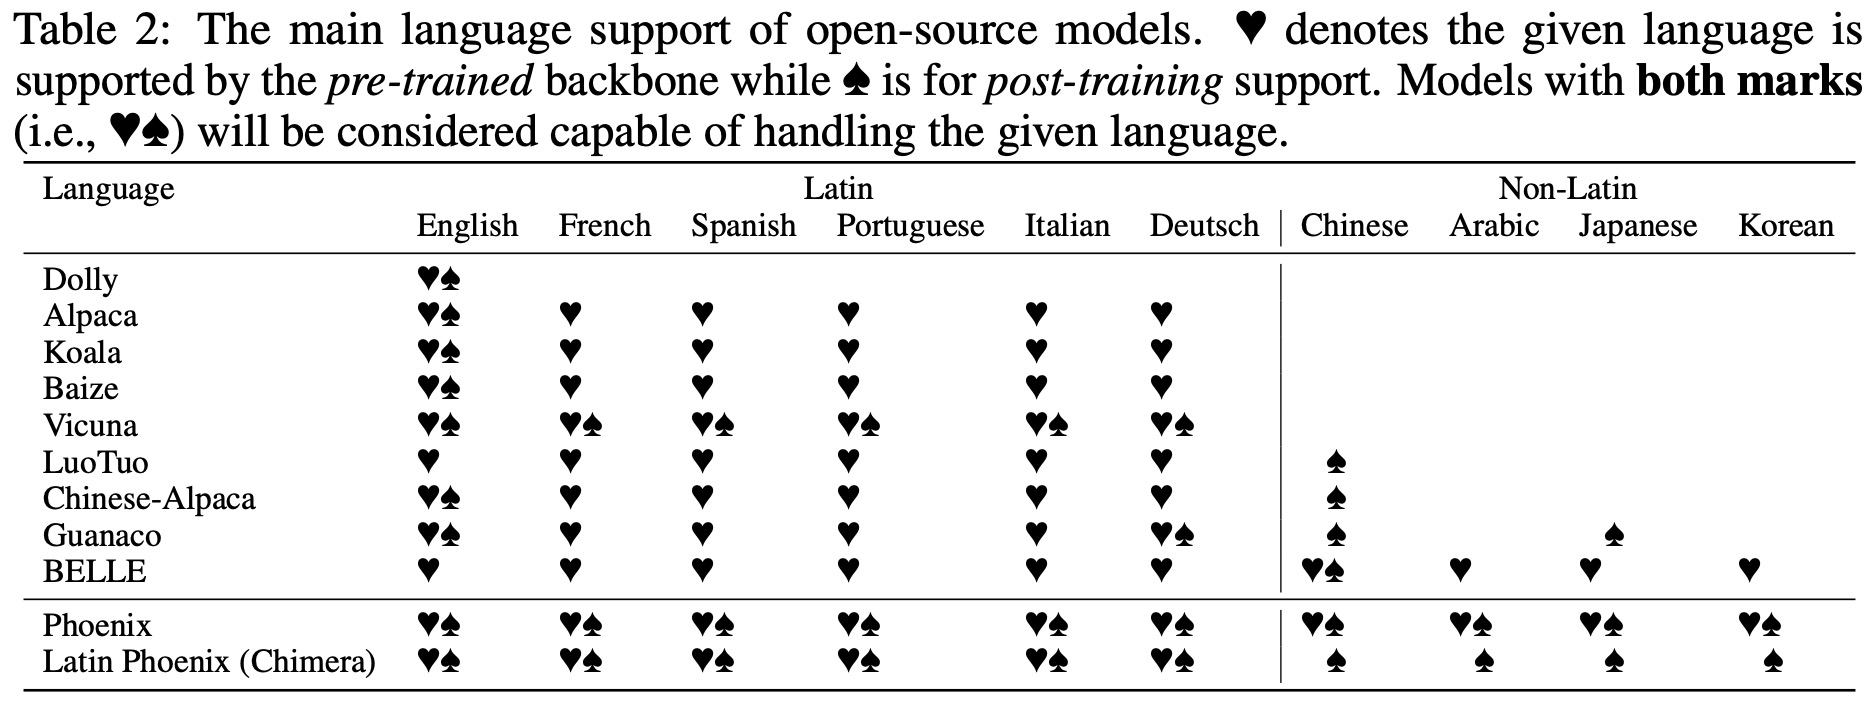 The main language support of open-source models